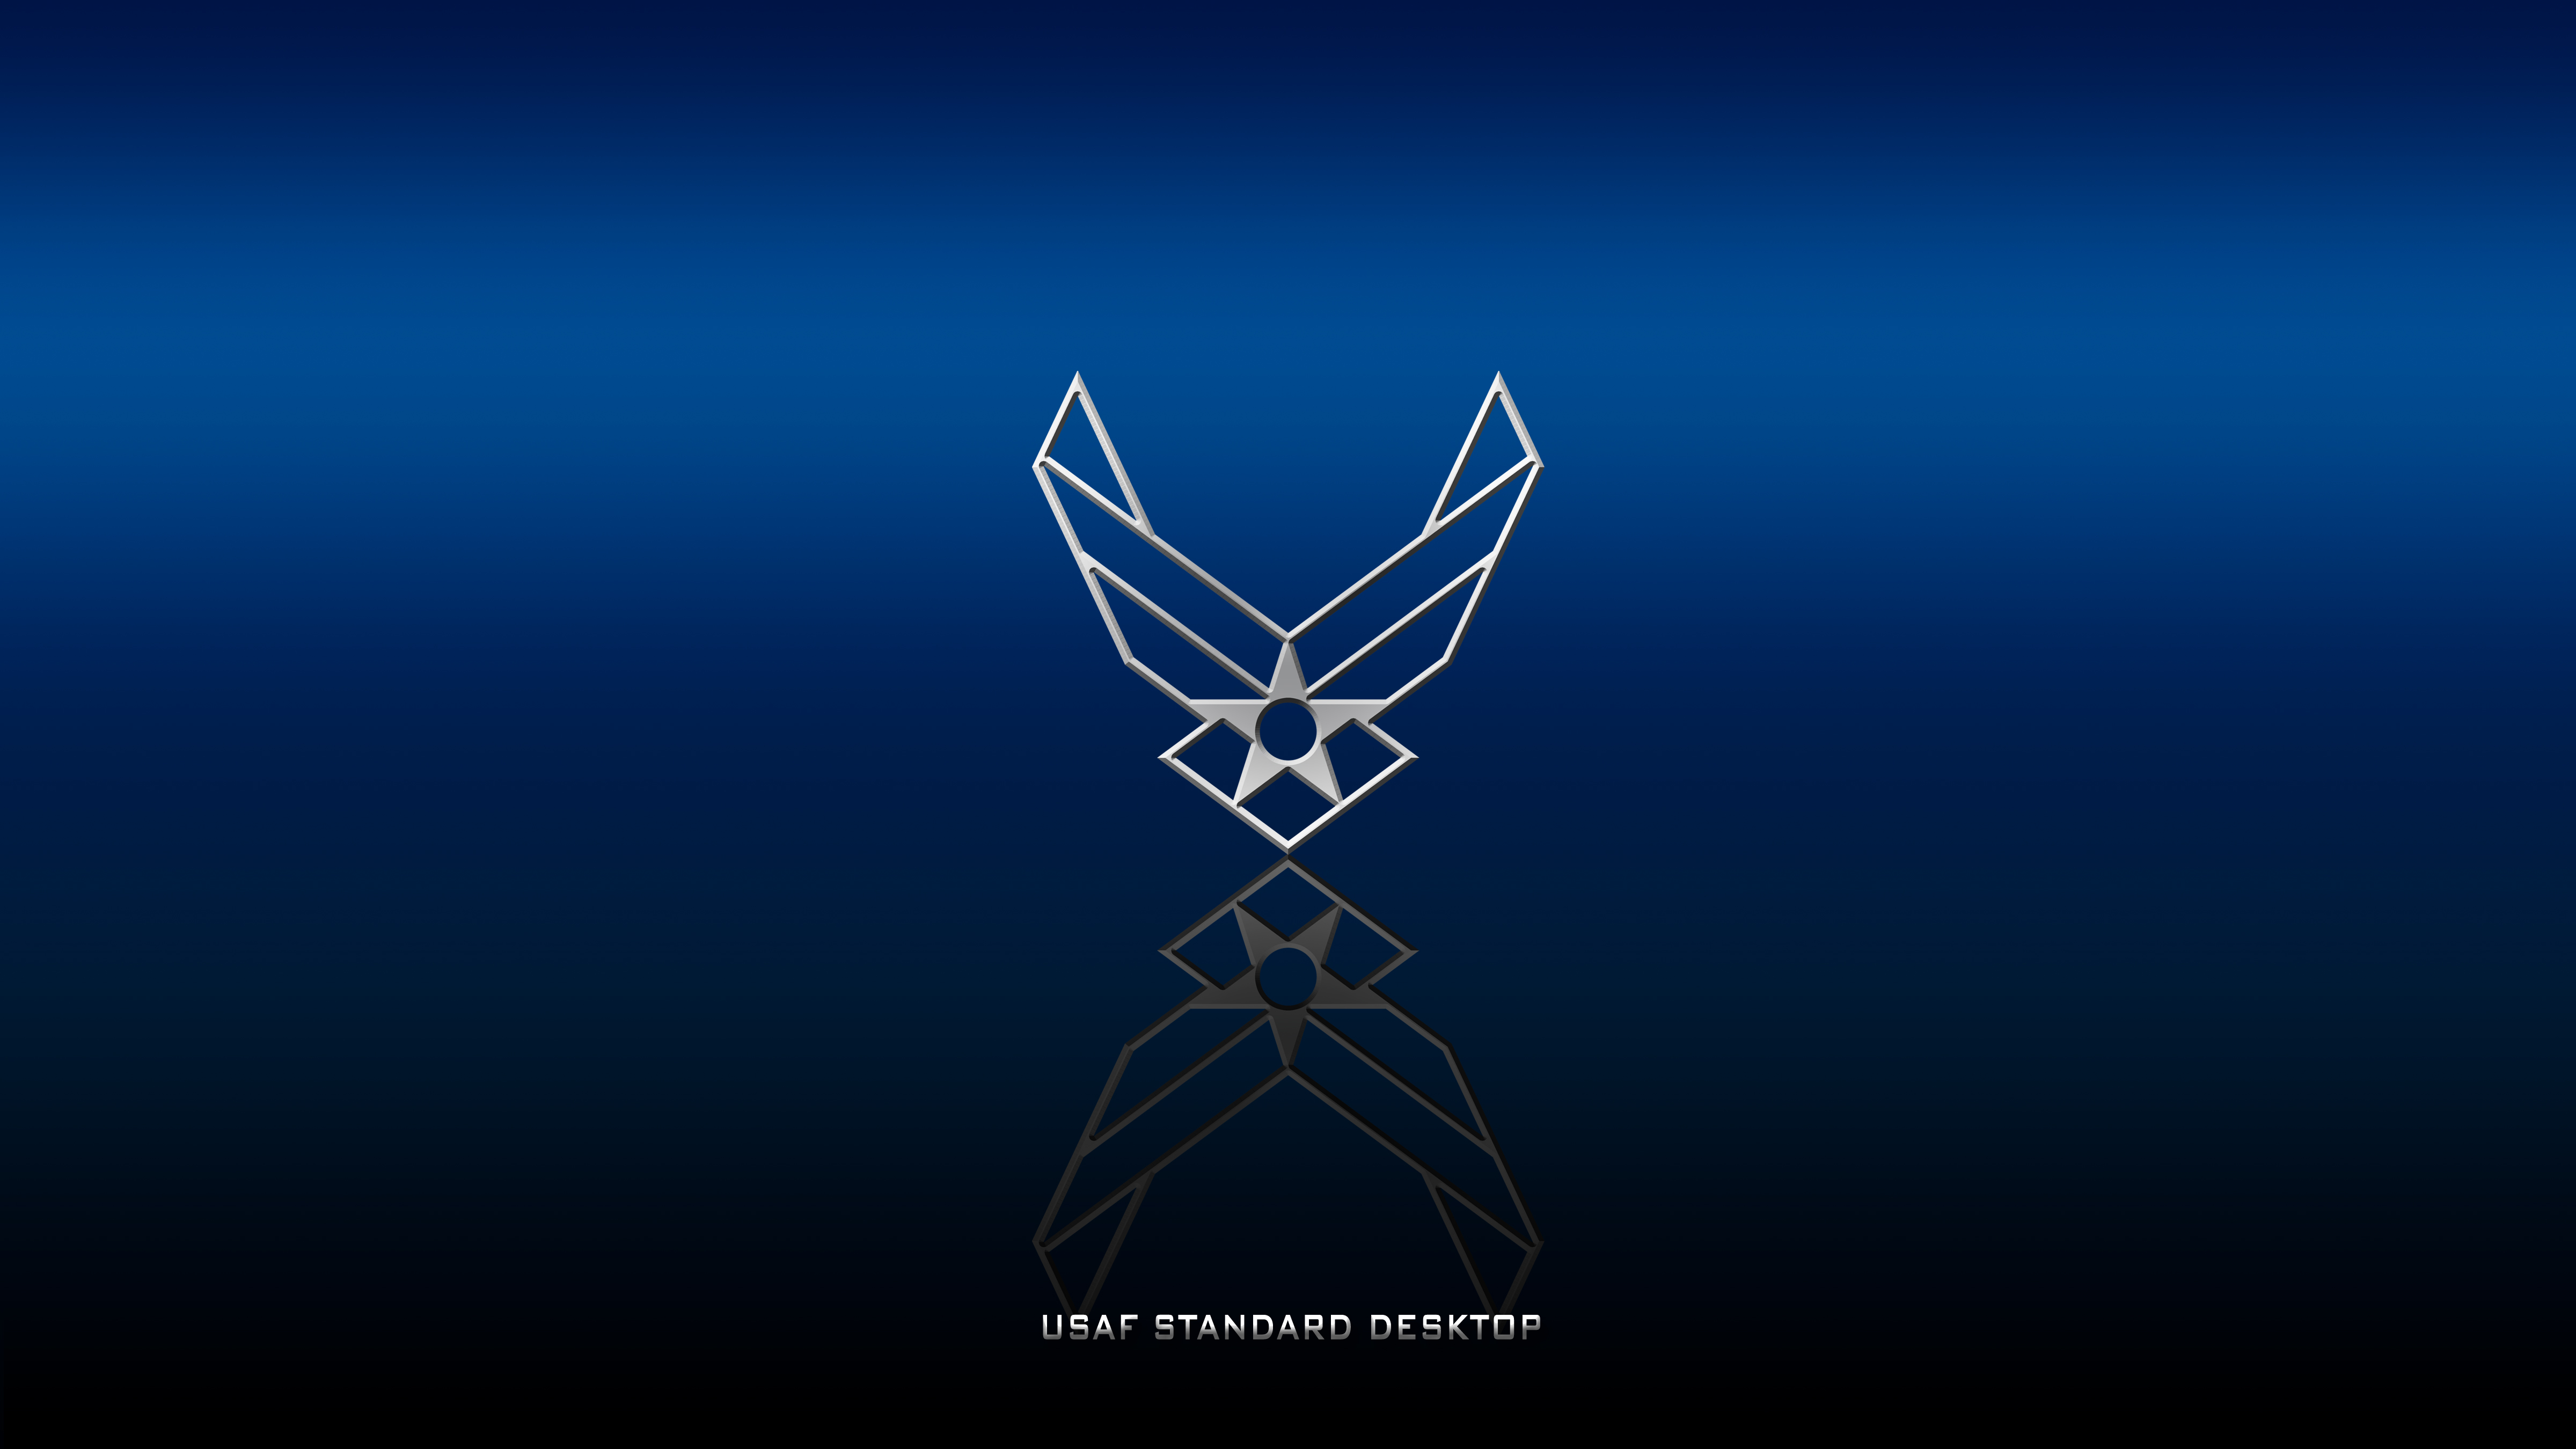 US Air Force Military Gradient USA Patriotic Simple Background Mirror Blue Beetle Reflection 4800x2700